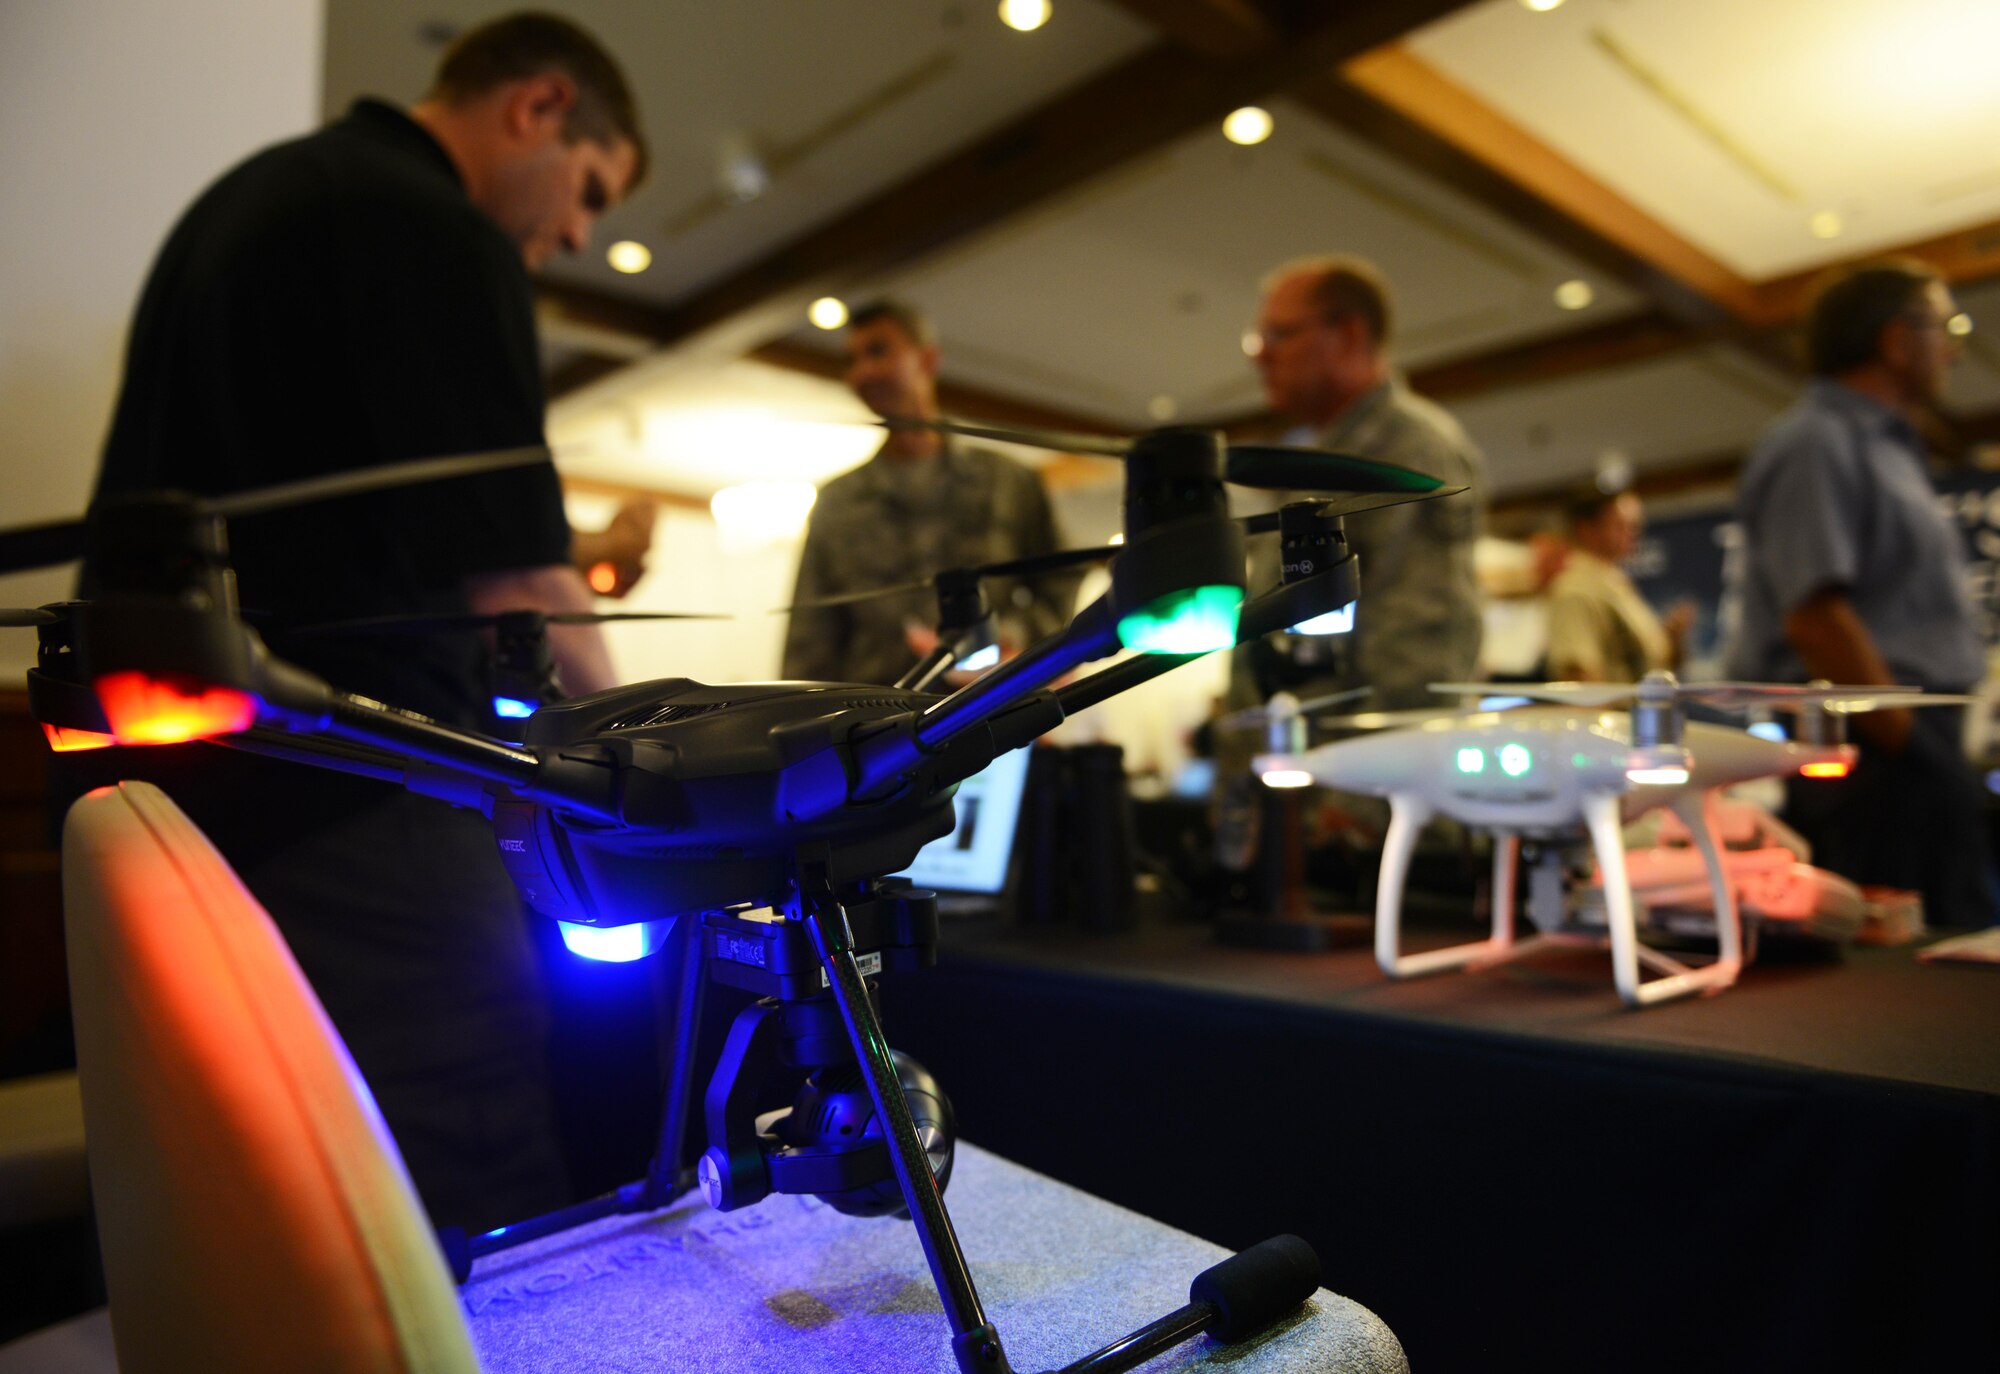 Drones used for photography and video are on display at Ramstein Air Base, Germany, July 19, 2016. The exhibit was part of the Ramstein Technology Exposition which took place at the Ramstein Officer’s Club. (U.S. Air Force photo/ Airman 1st Class Joshua Magbanua)